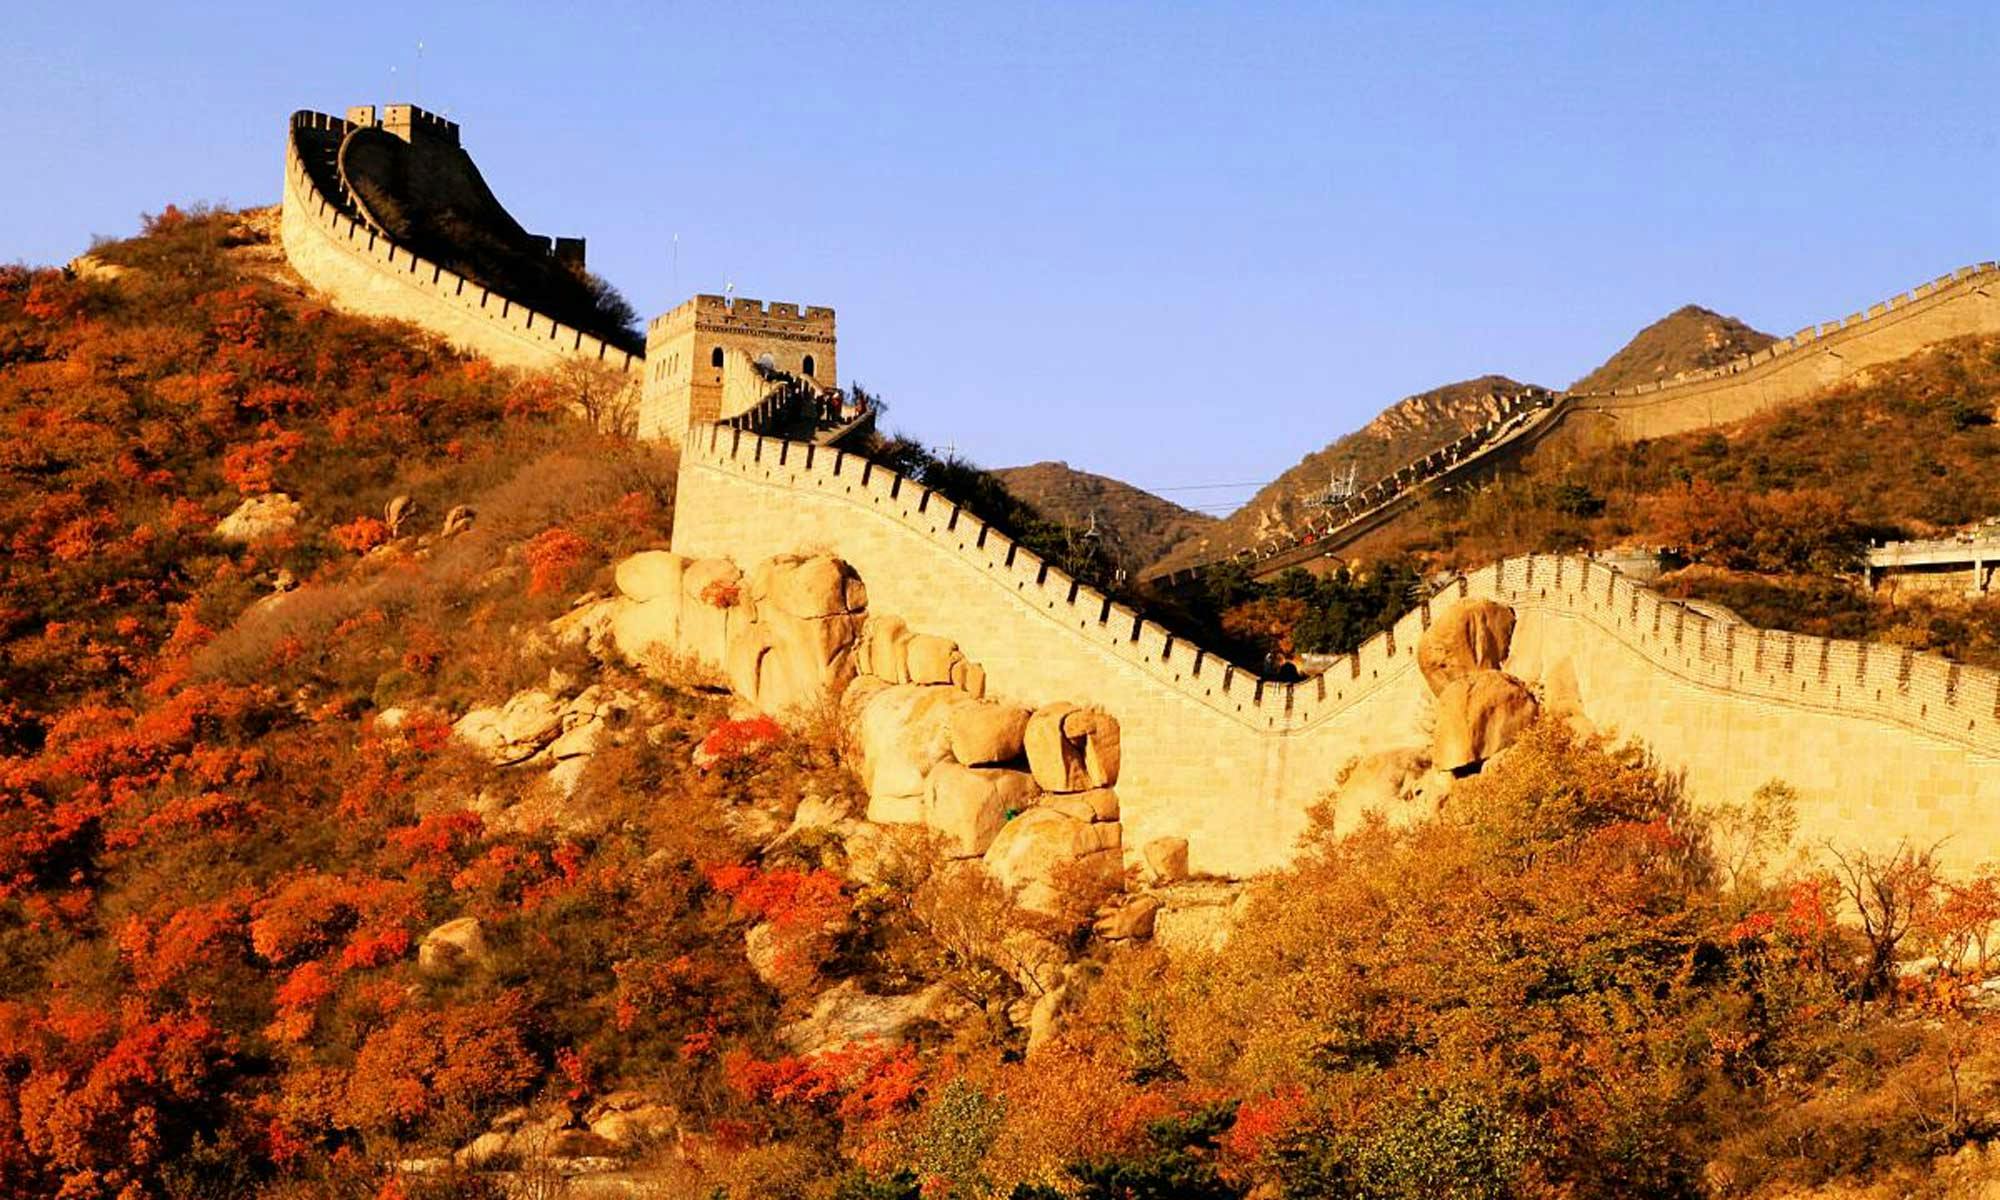 All-inclusive Beijing classic tour of Badaling Great Wall and customizable sites Musement